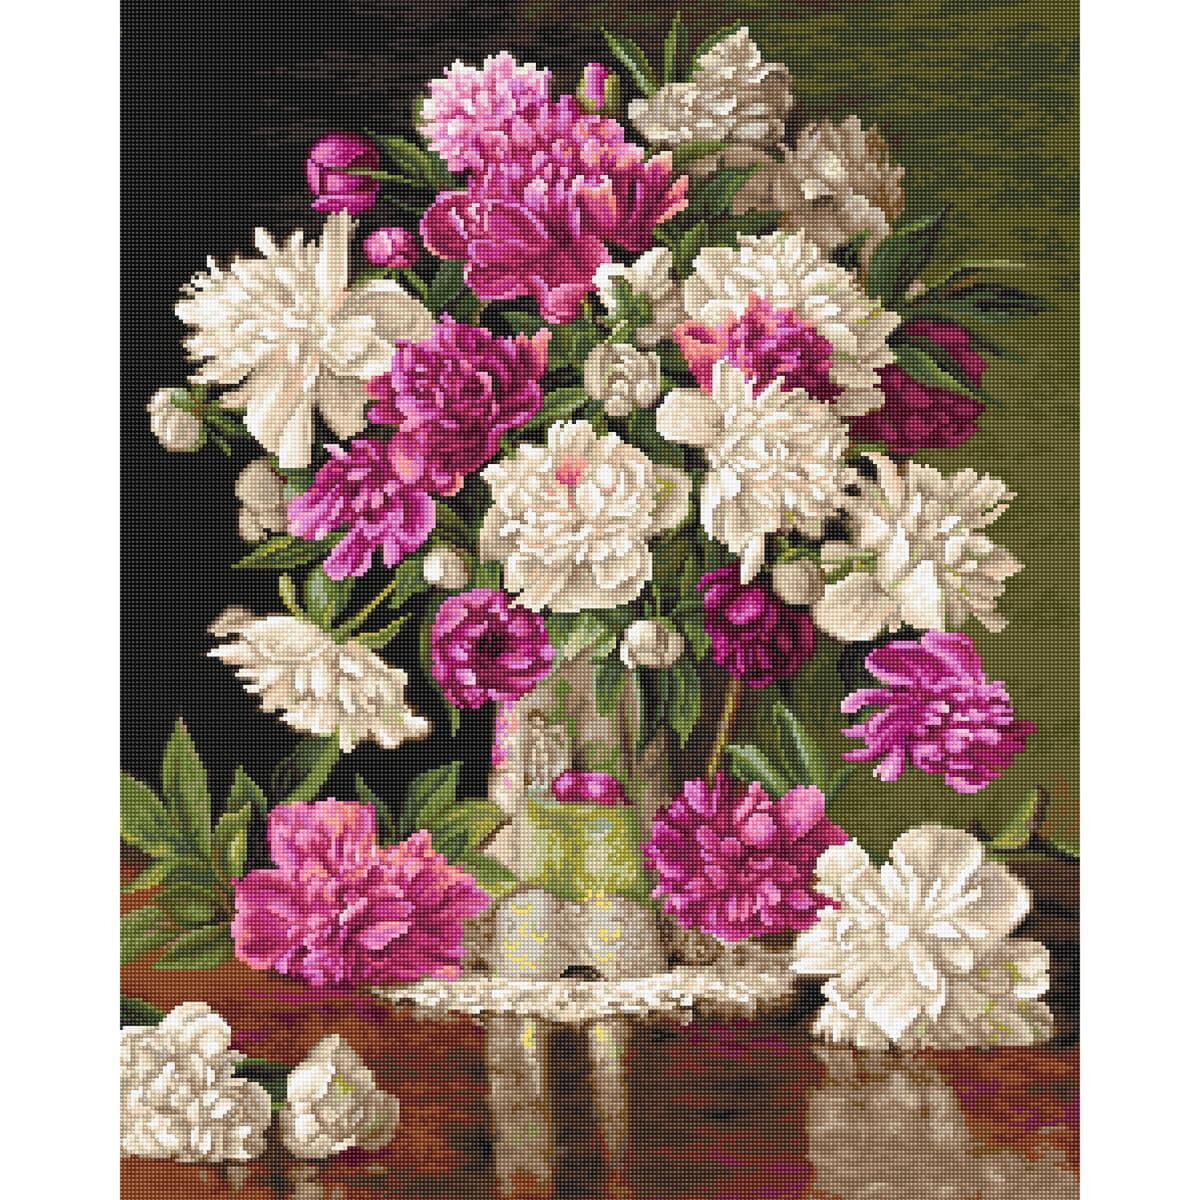 A colorful bouquet of pink and white flowers in a glass...